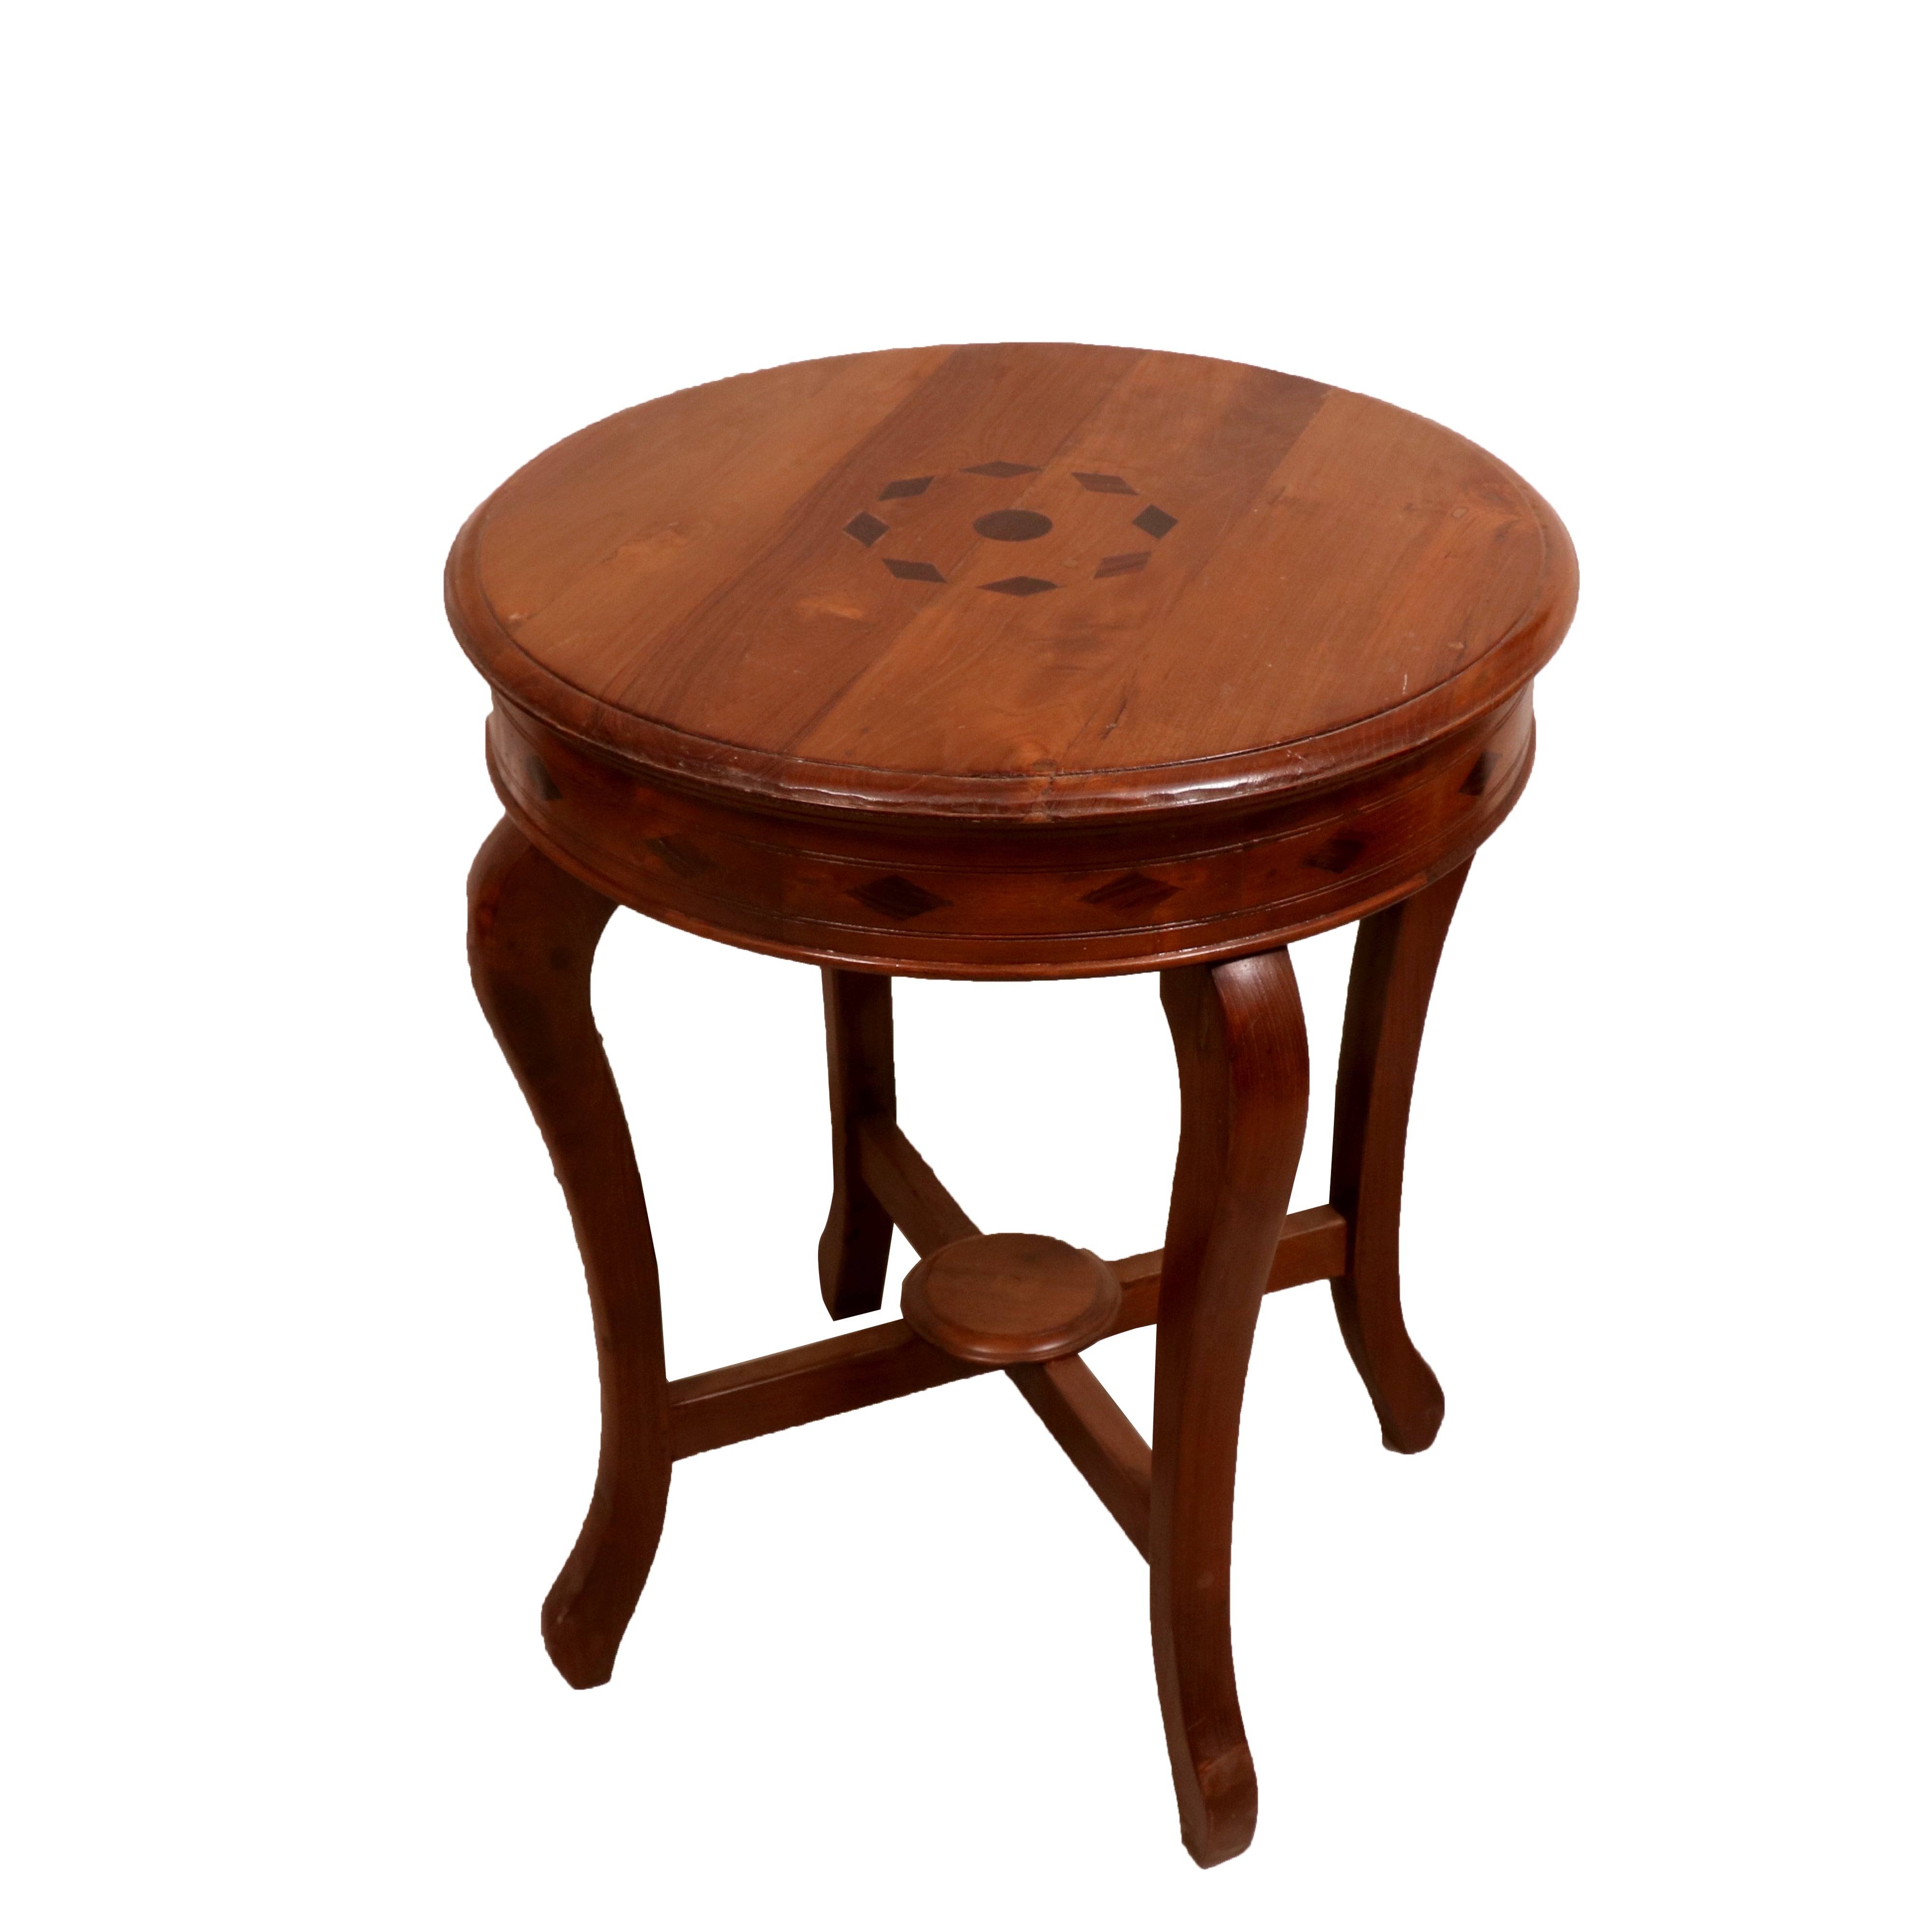 Diamond Inlay Top Round End Table End Table